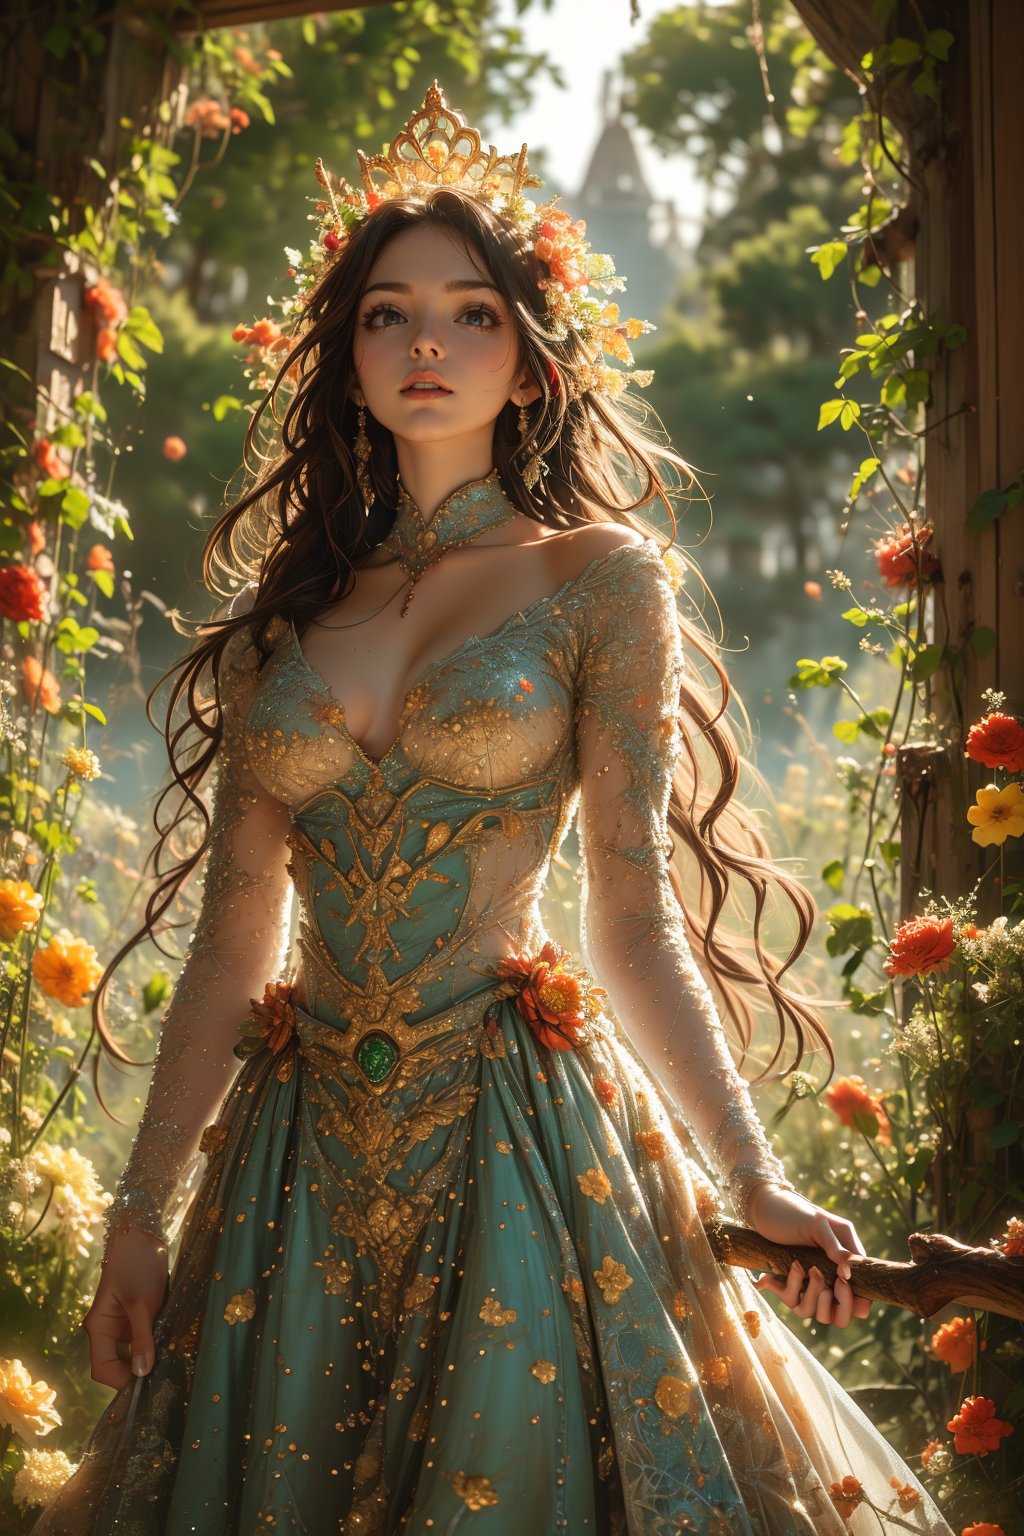 In a dappled, ancient forest ruin, an Elf Princess stands tall, her staff raised high as beams of warm sunlight filter through the trees, casting a golden halo around her regal figure. Her revealing, enchanted clothing shimmers in the soft light, while lush foliage and vines surround her, creating a lush environment. The camera captures a sharp focus on the princess's face, with the rule of thirds composition placing her at the intersection of two diagonals. Shot during the golden hour, the scene exudes an ethereal mood, inviting the viewer to step into this mystical realm., ,fantasy,better_hands,leonardo,angelawhite,Enhance